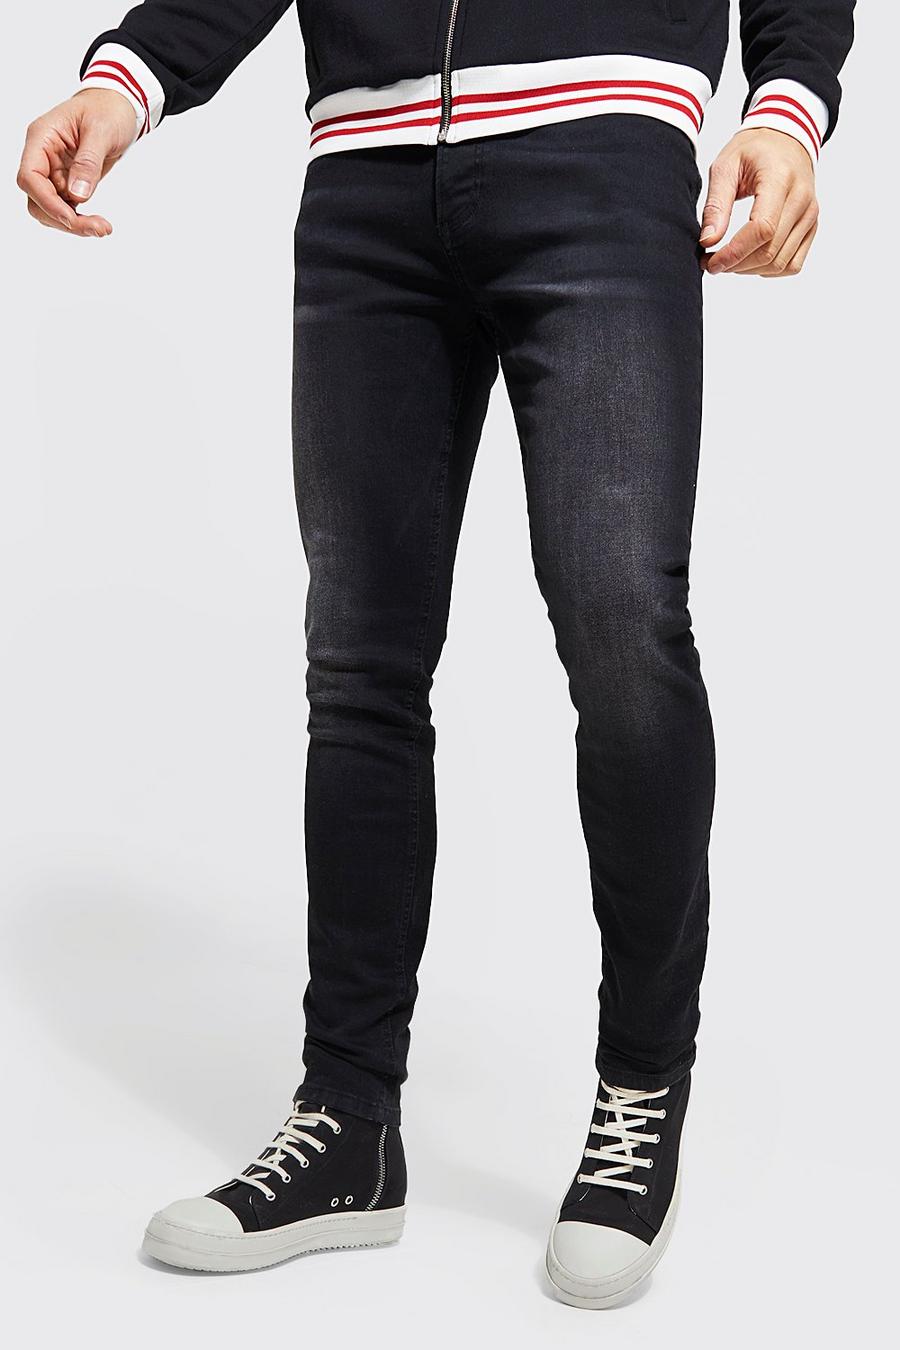 Washed black Tall Stretch Skinny Jeans